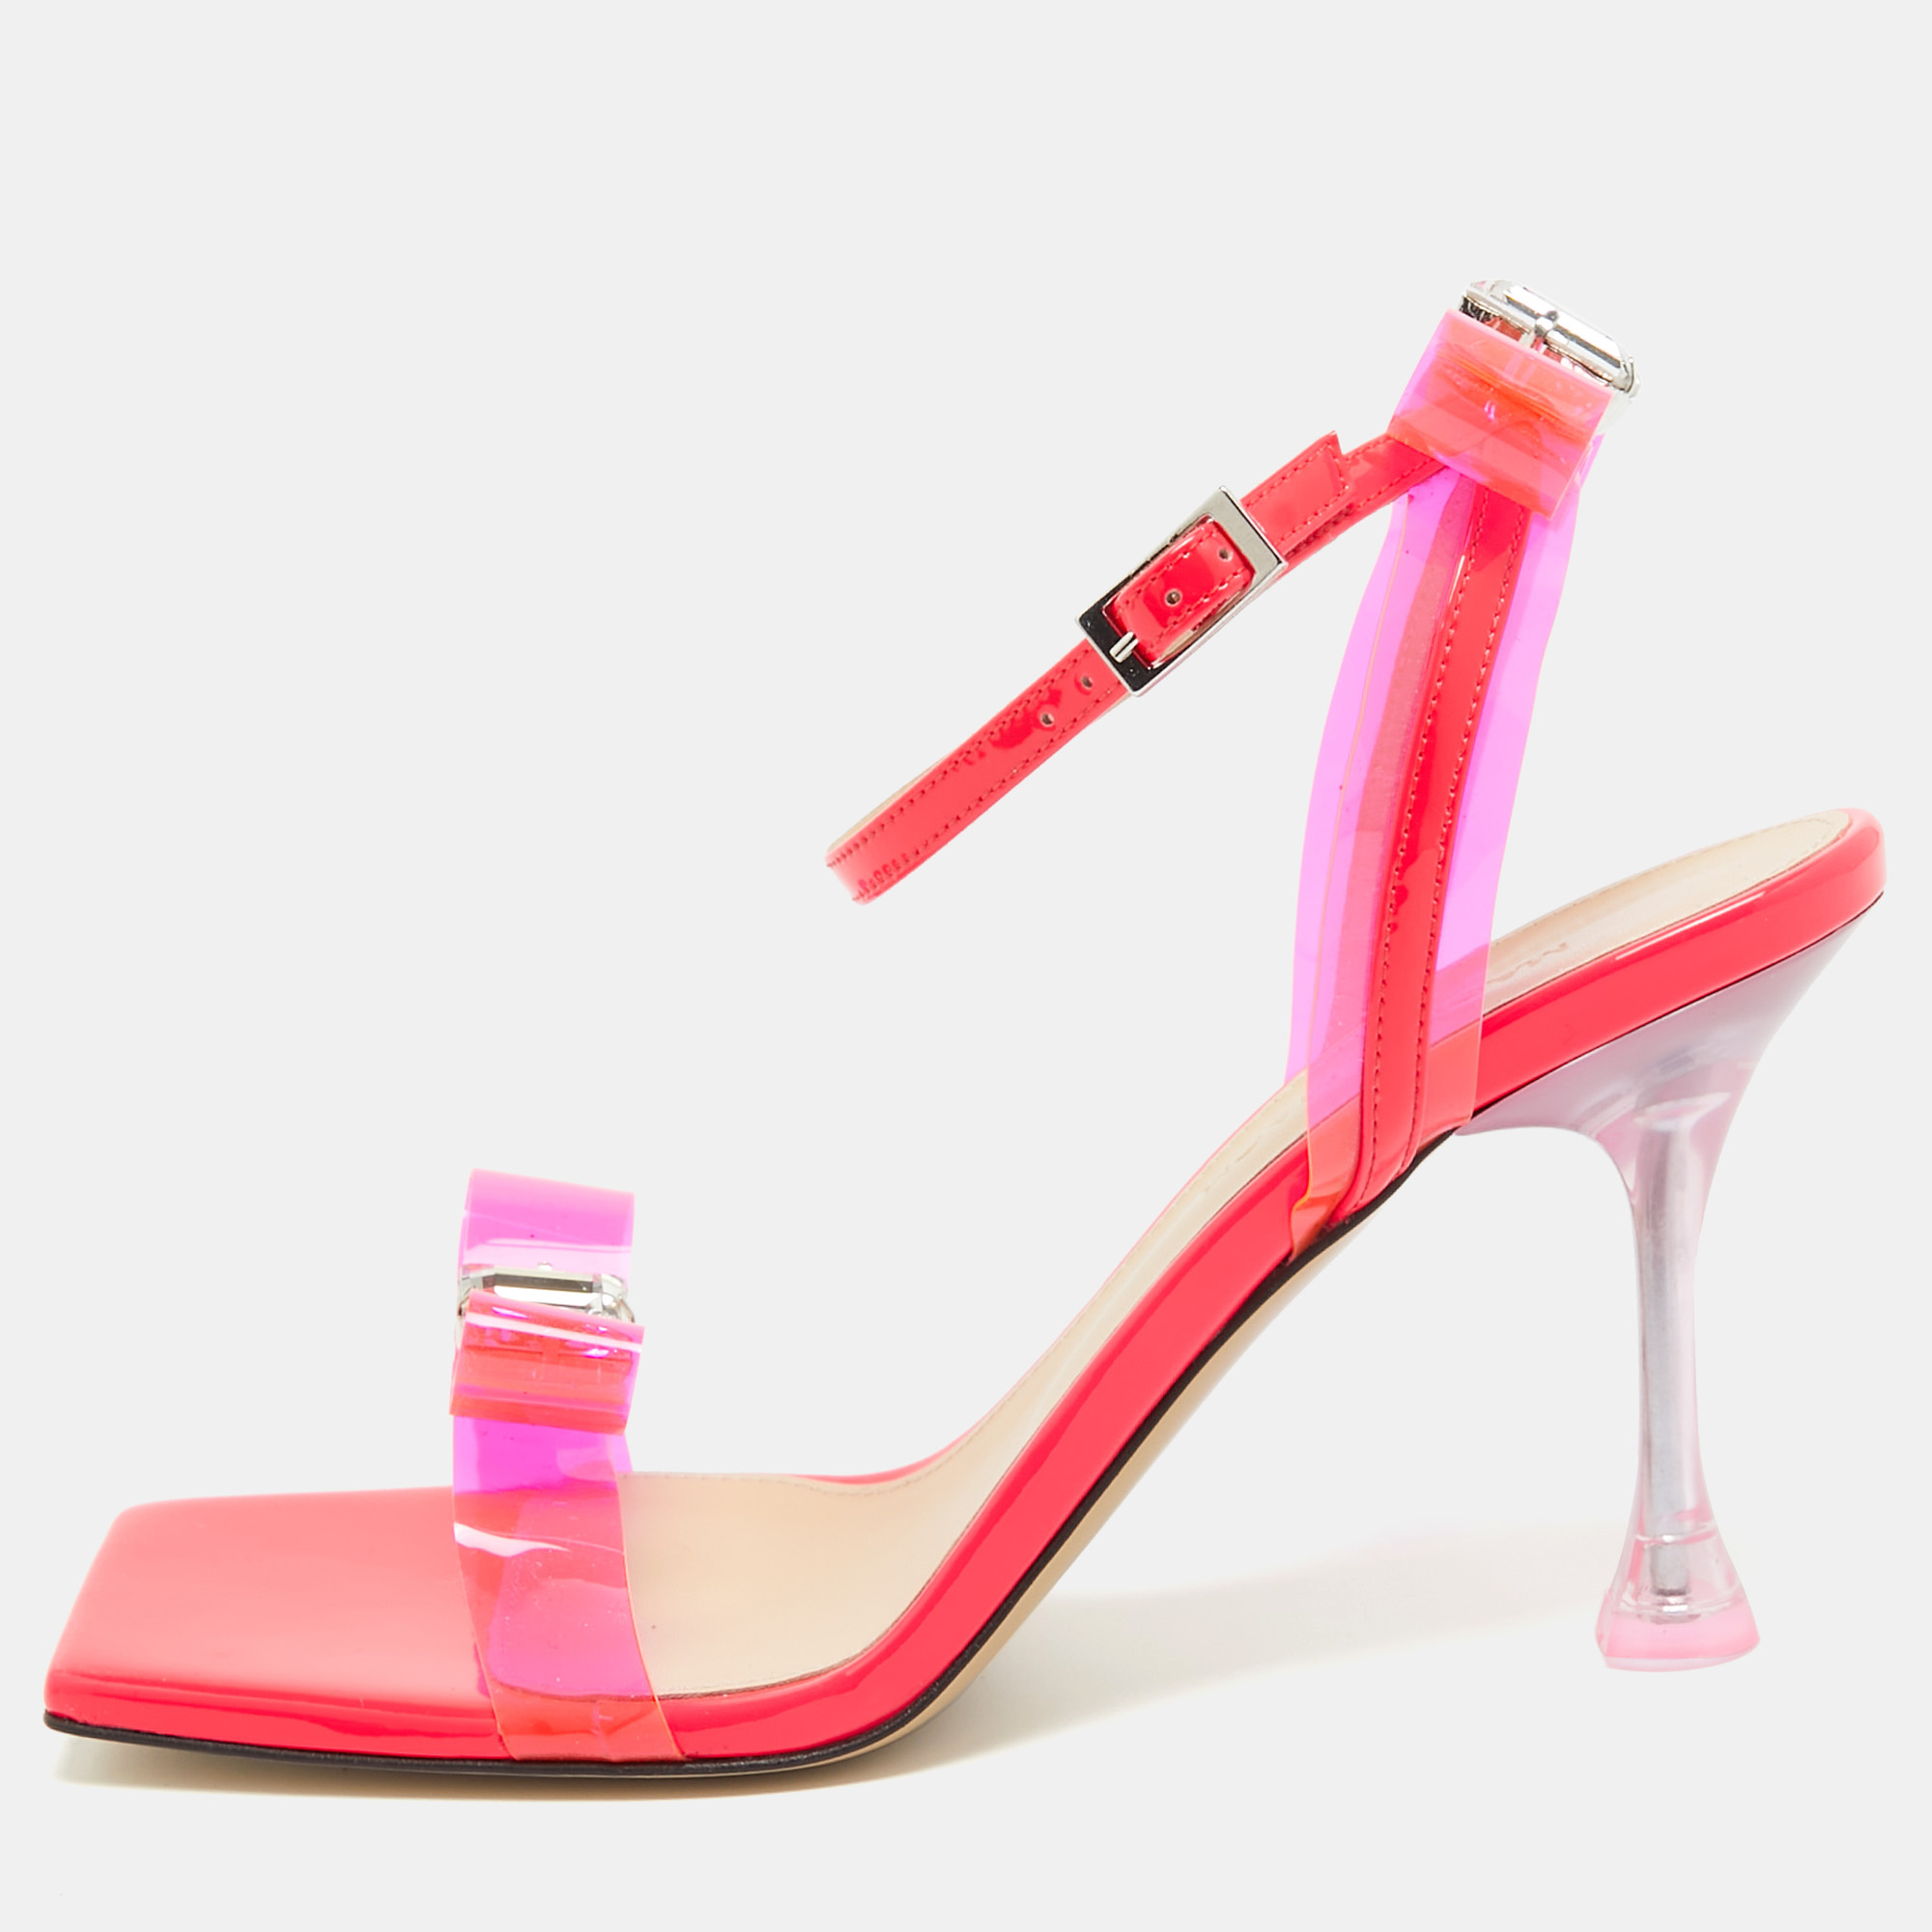 Mach & mach neon pink pvc and patent leather french bow sandals size 40.5